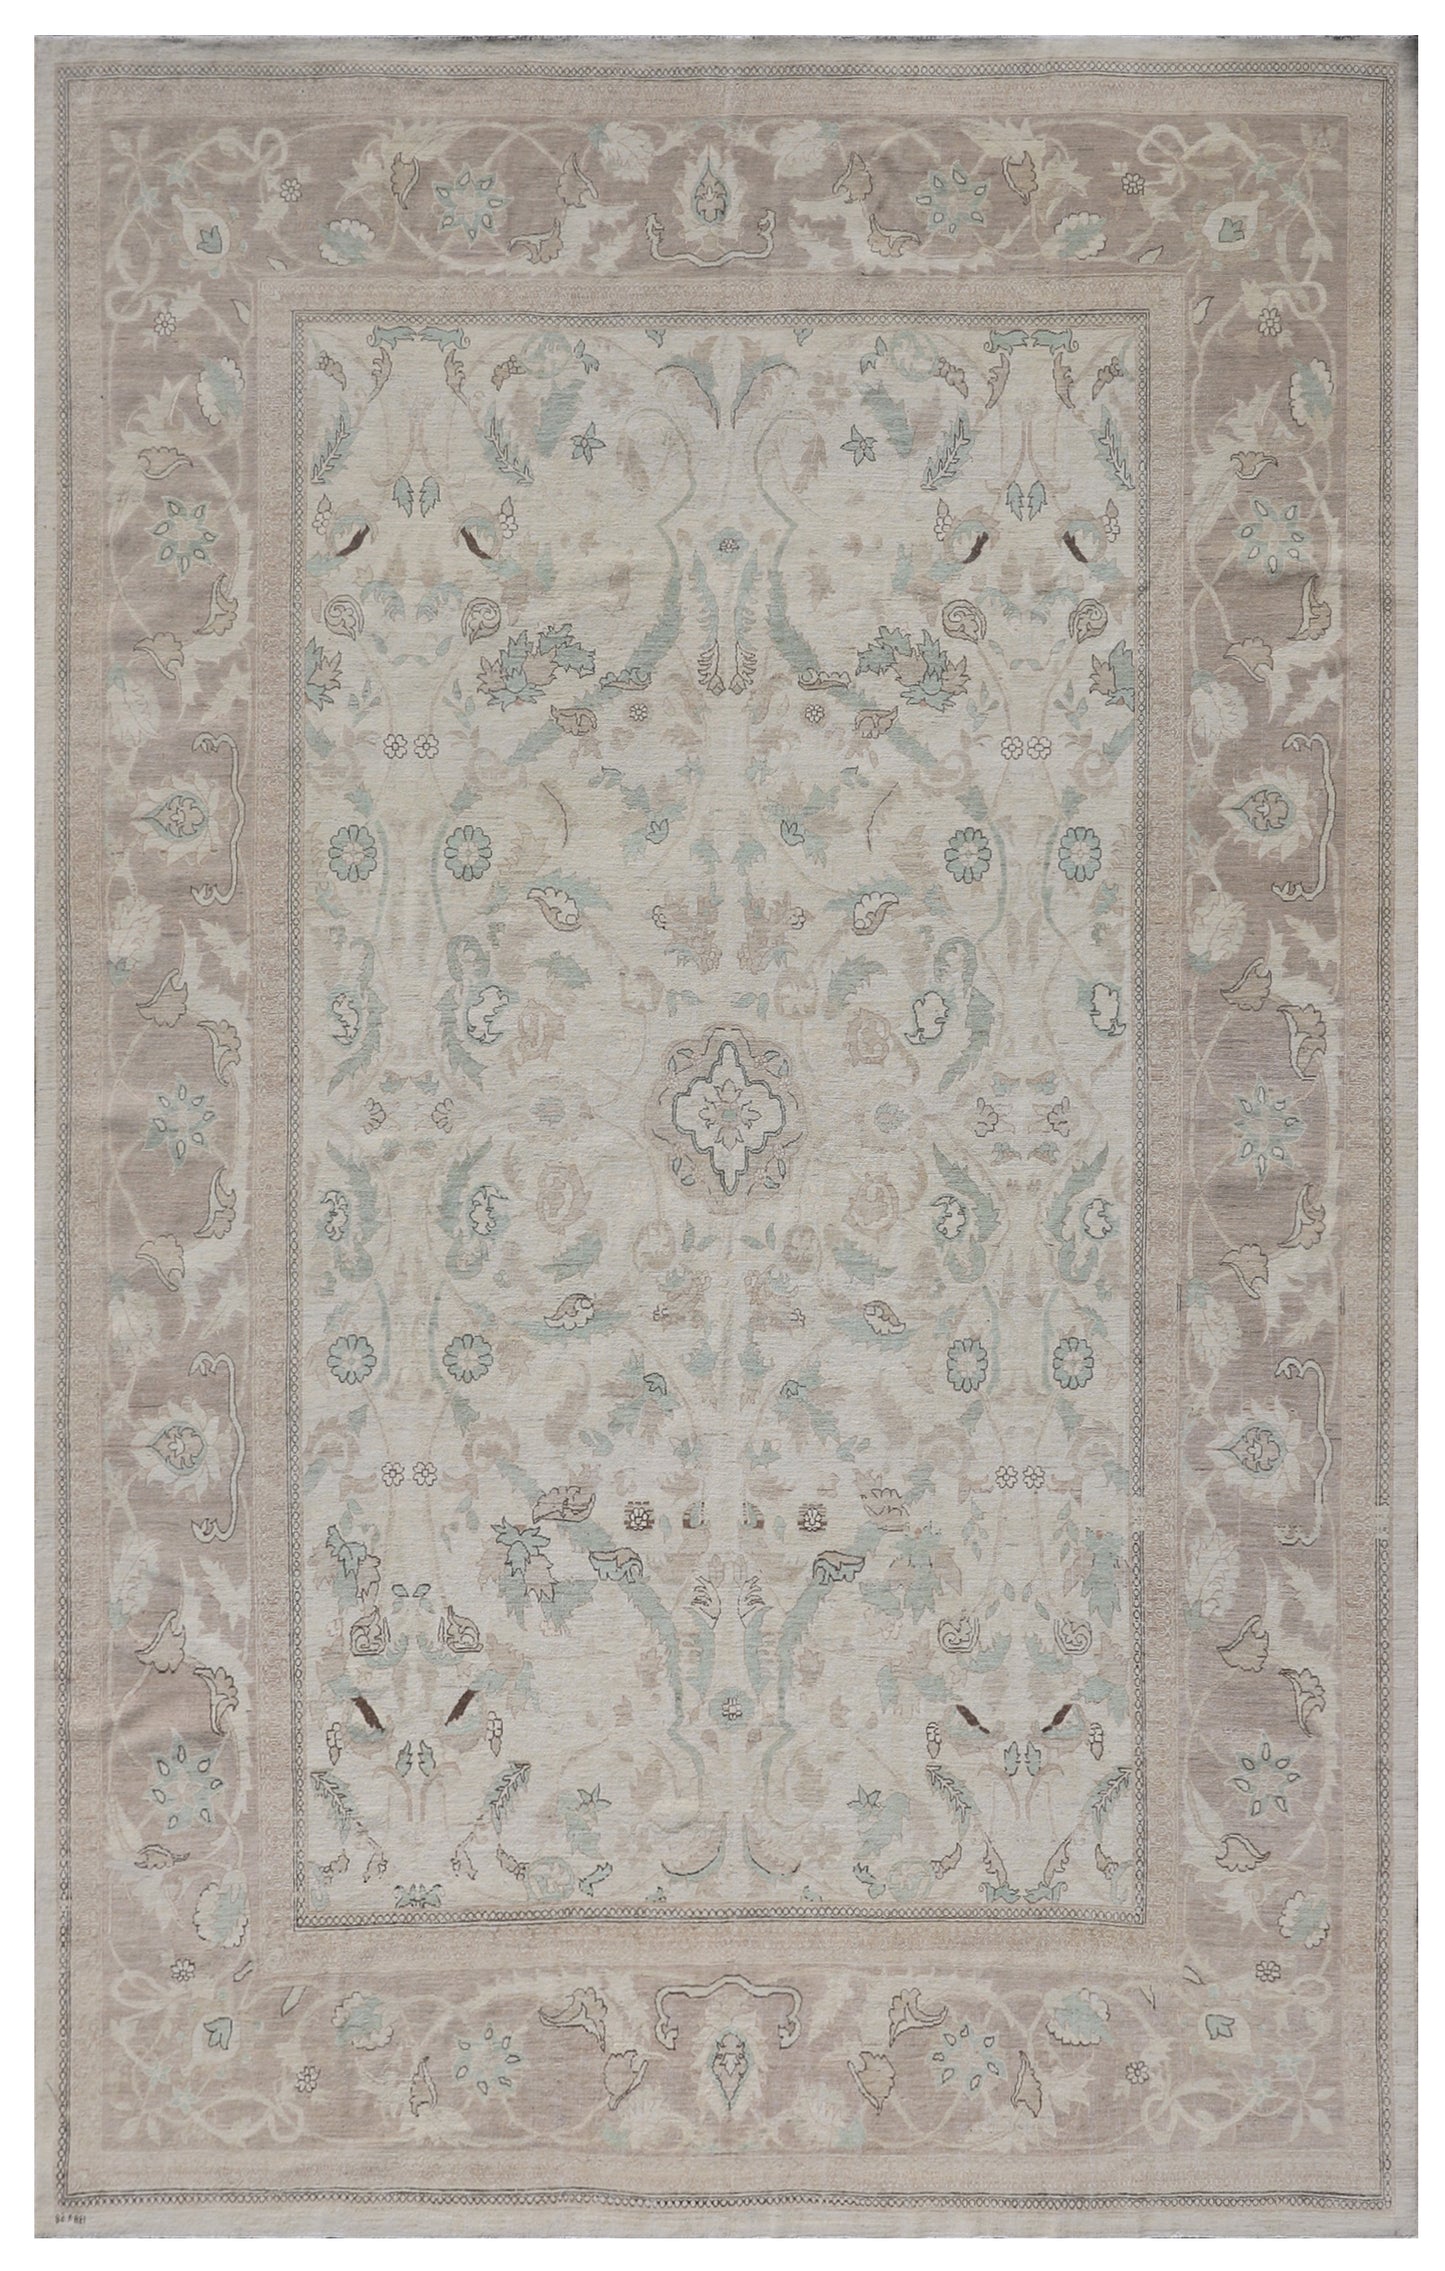 10'x14' Ariana Polonaise Design Green Blue Pink Ivory Brown Silk and Wool Luxury Rug